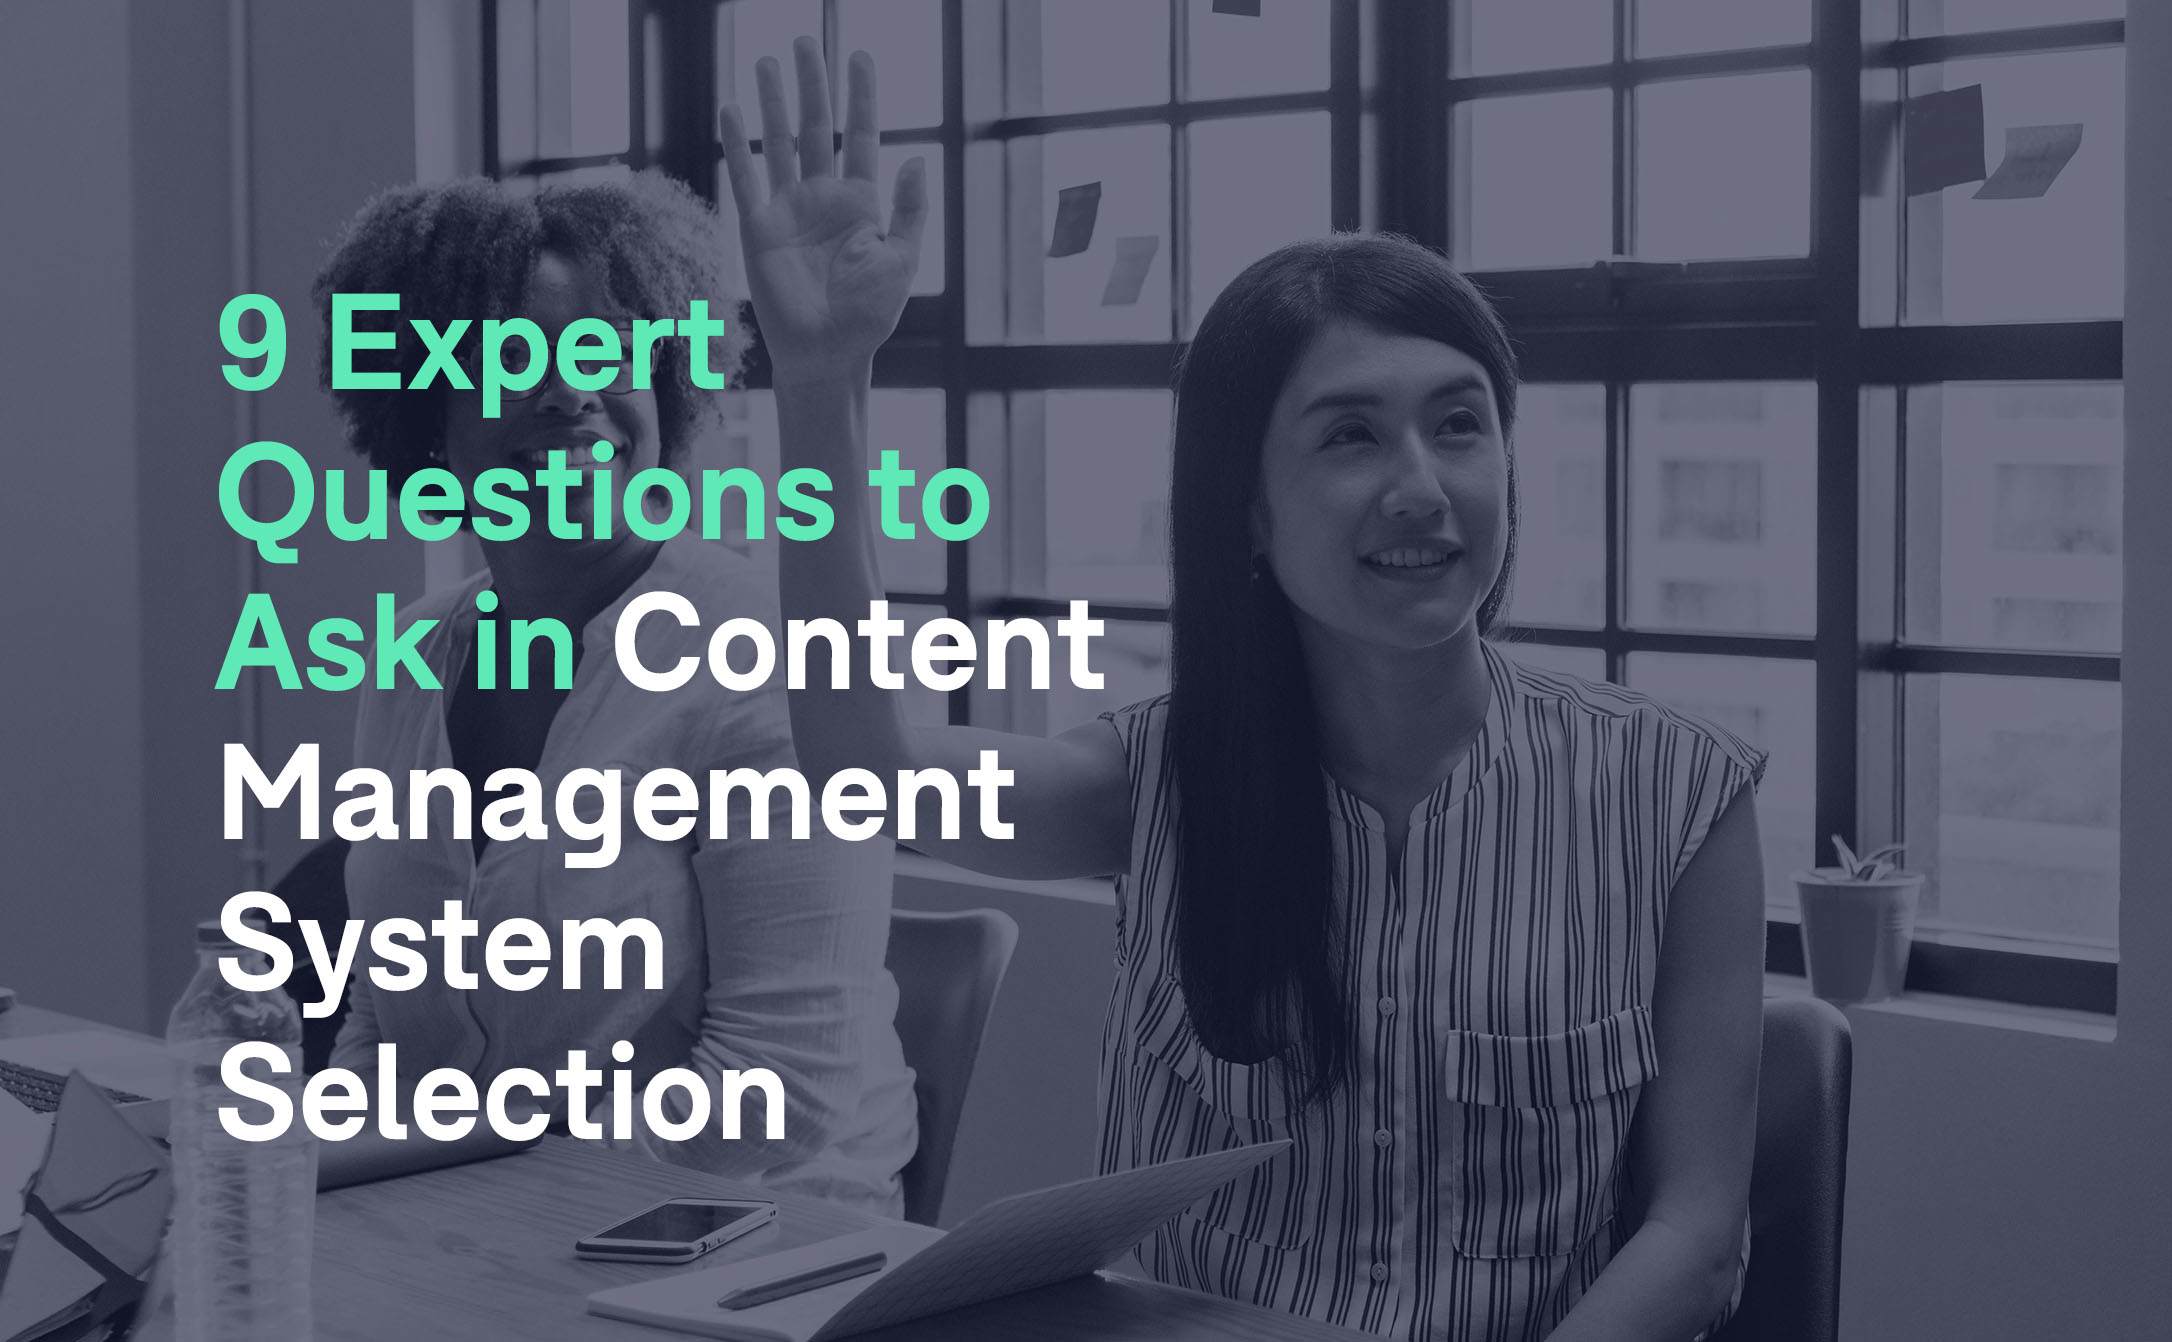 9 Expert Questions to Ask in Content Management System Selection